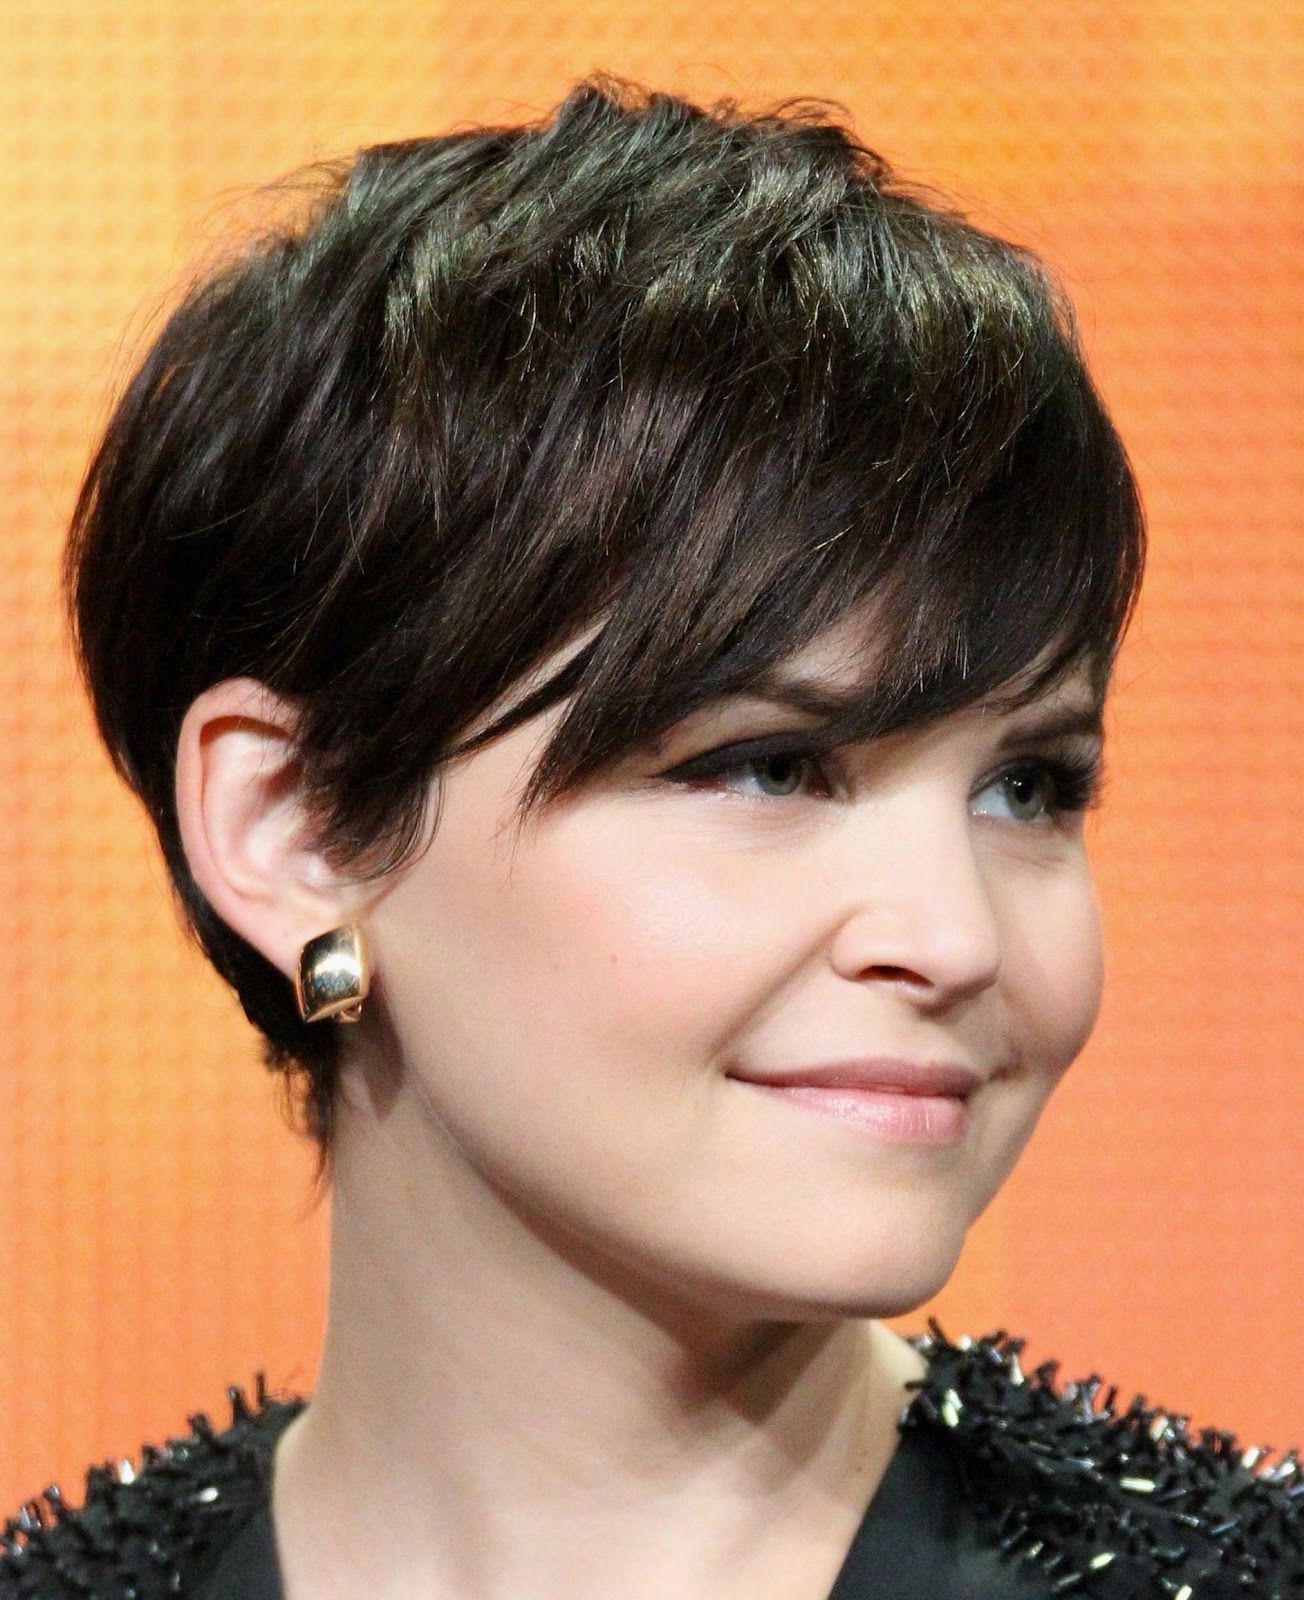 28+ Albums Of Pixie Cut Hairstyles For Round Faces | Explore Inside Tapered Pixie Boyish Haircuts For Round Faces (View 15 of 20)